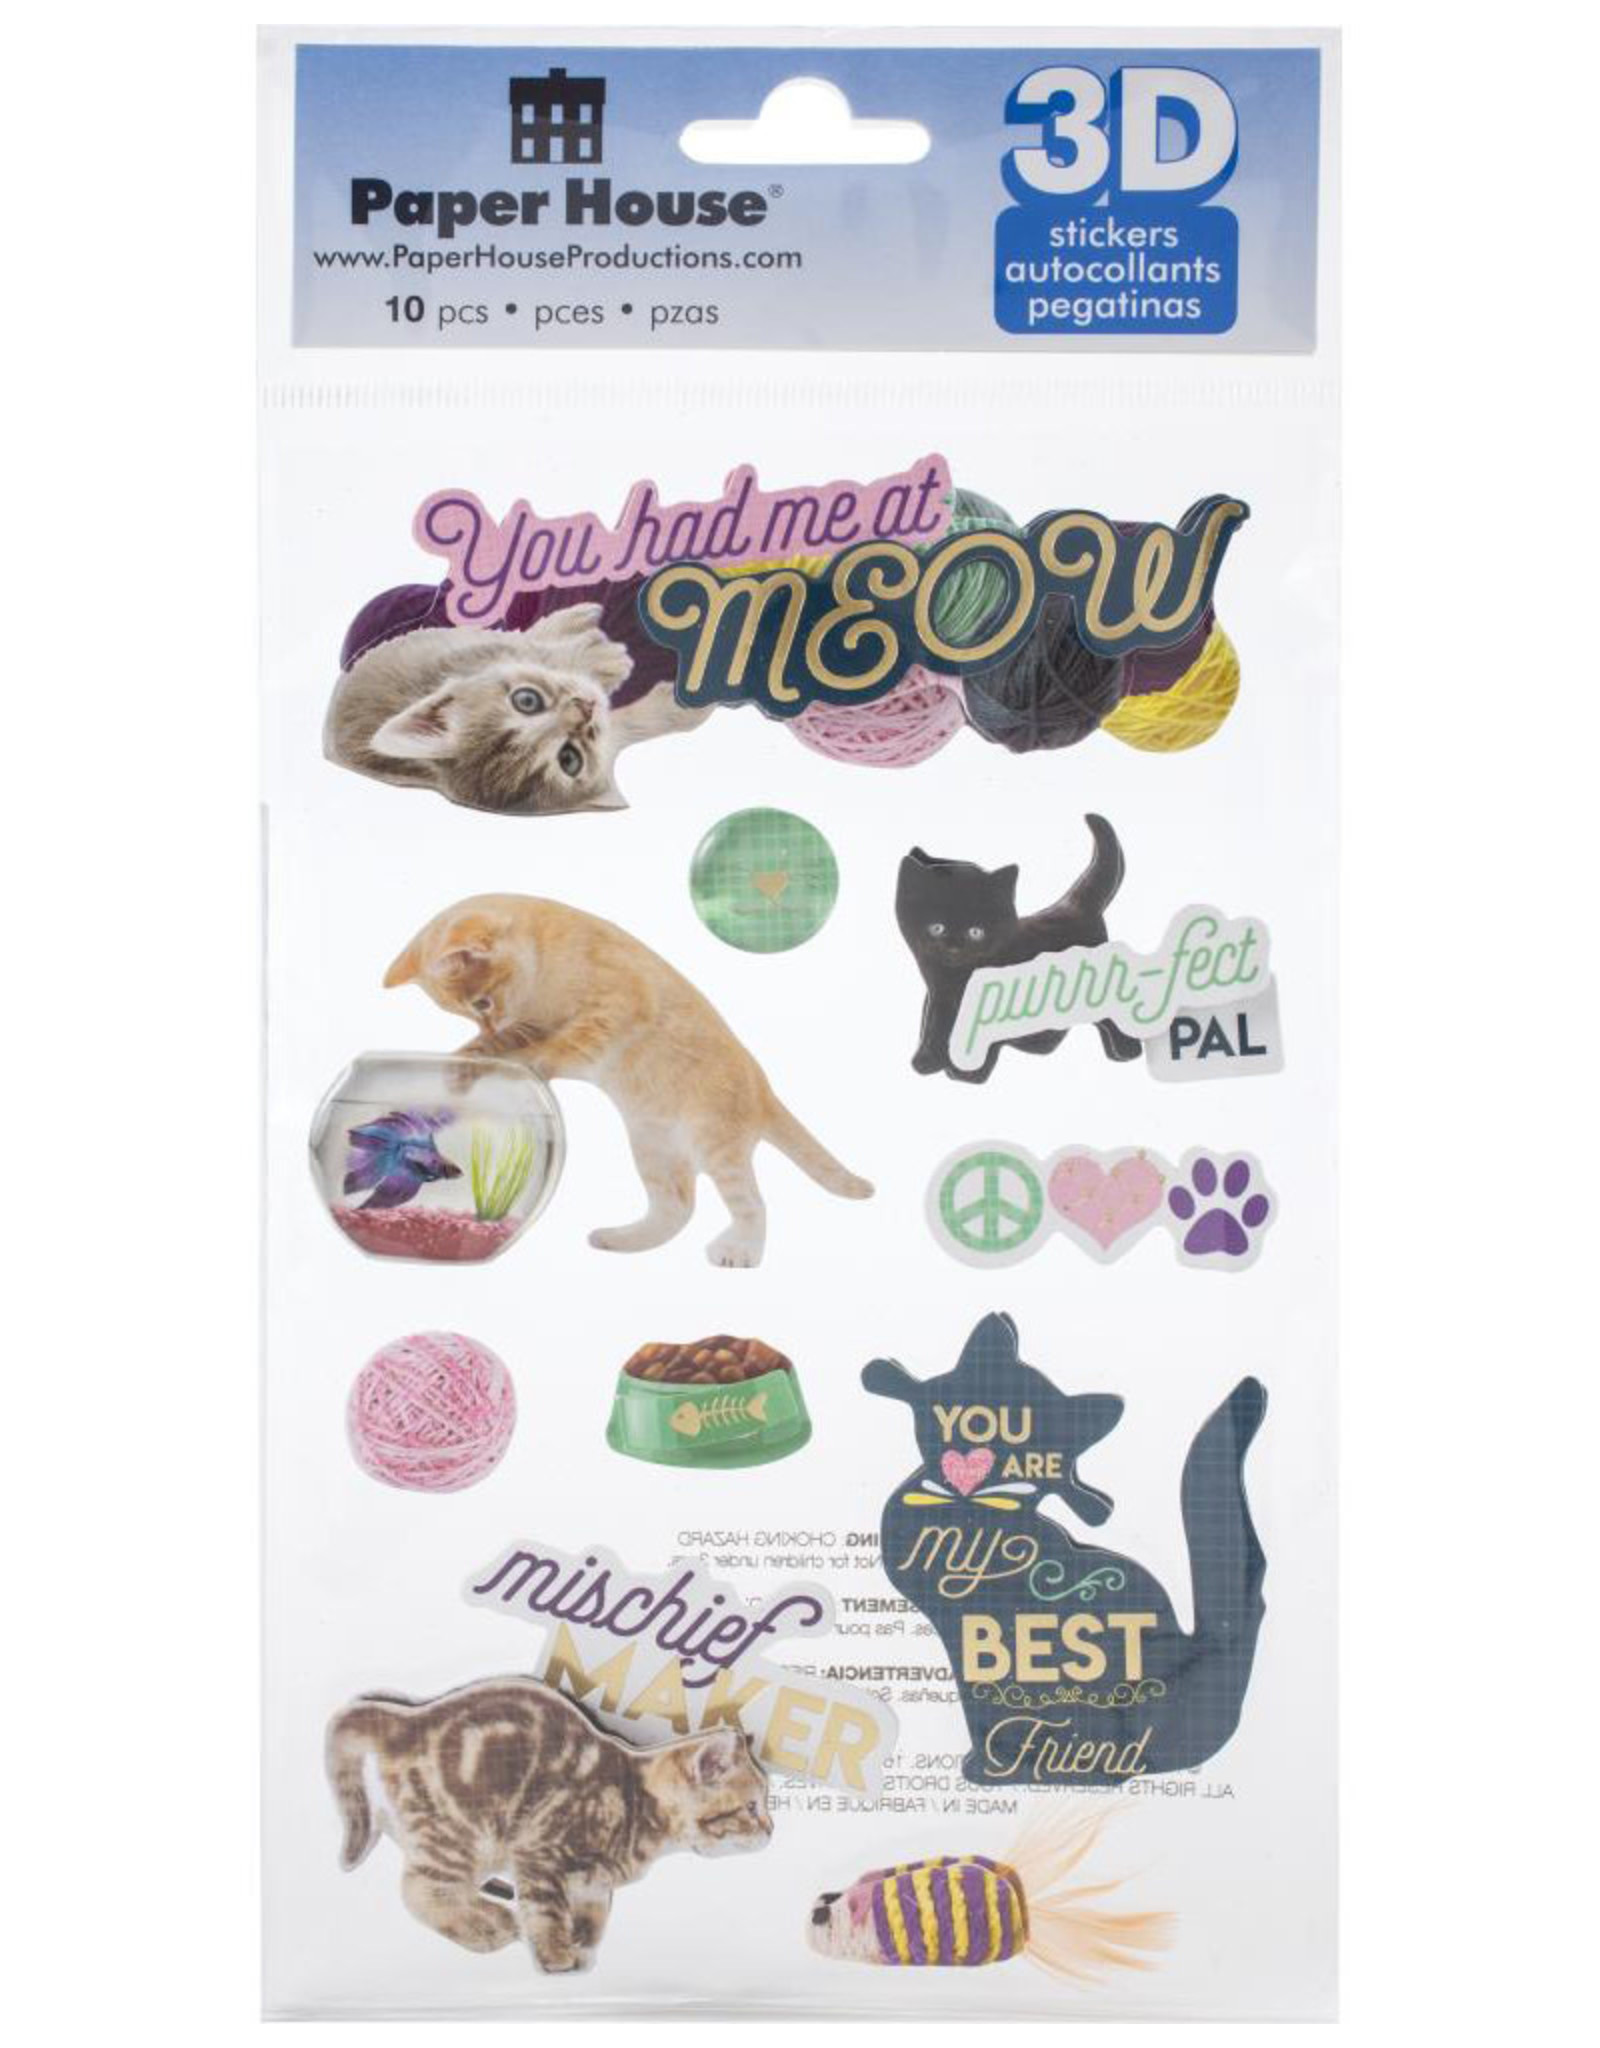 PAPER HOUSE PRODUCTIONS PAPER HOUSE YOU HAD ME AT MEOW 3D STICKERS